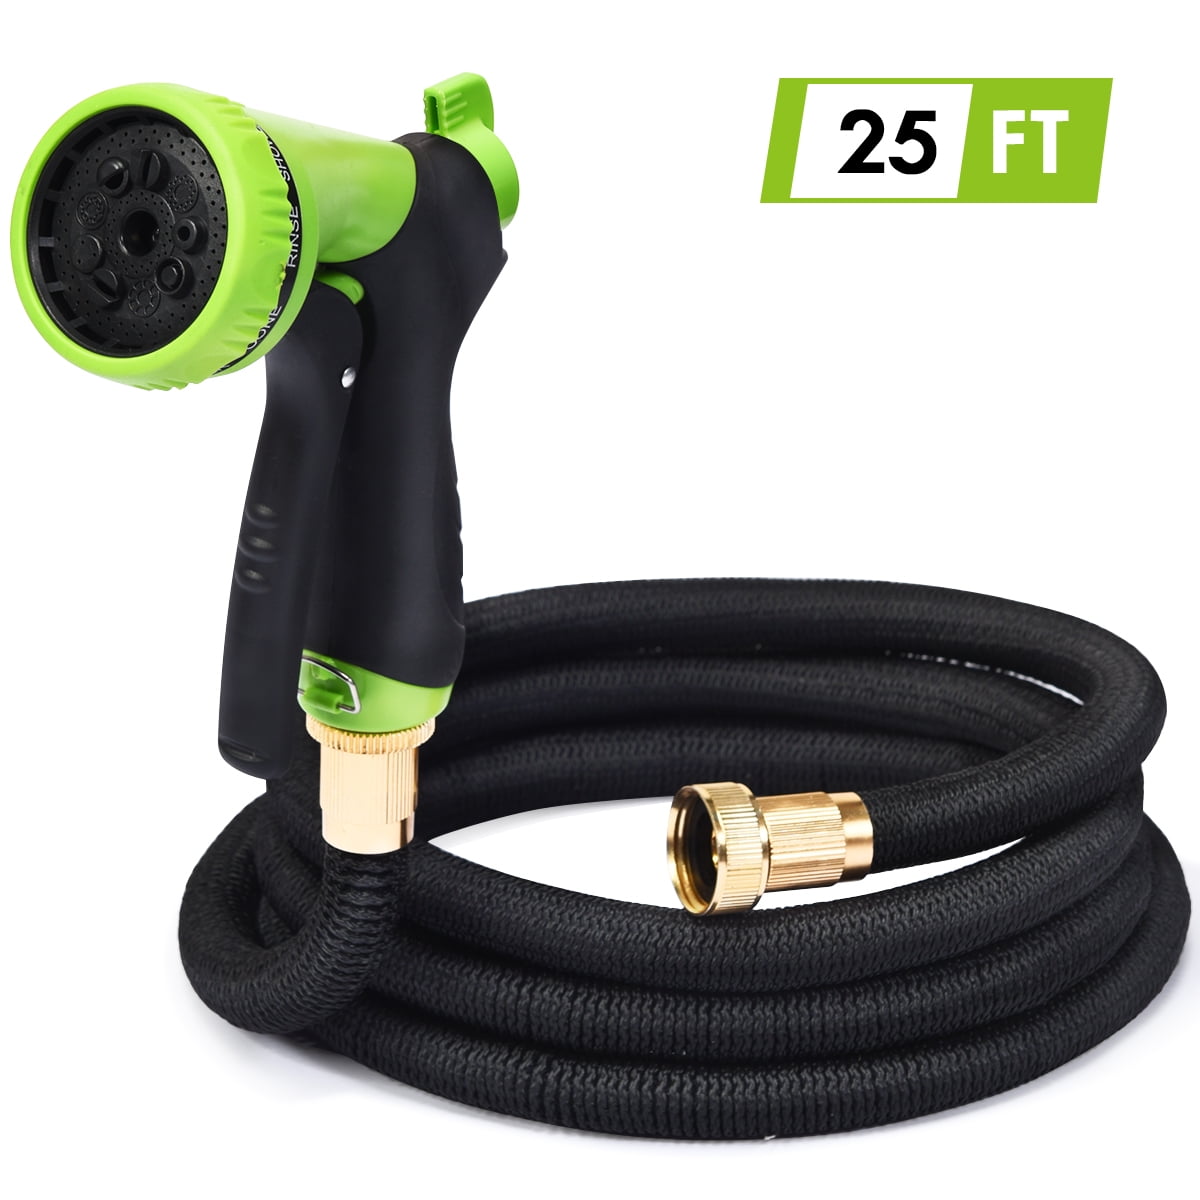 Details about   Garden Water Hose 25-100 FT Expanding Flexible Latex Pipe With Spray Nozzle 